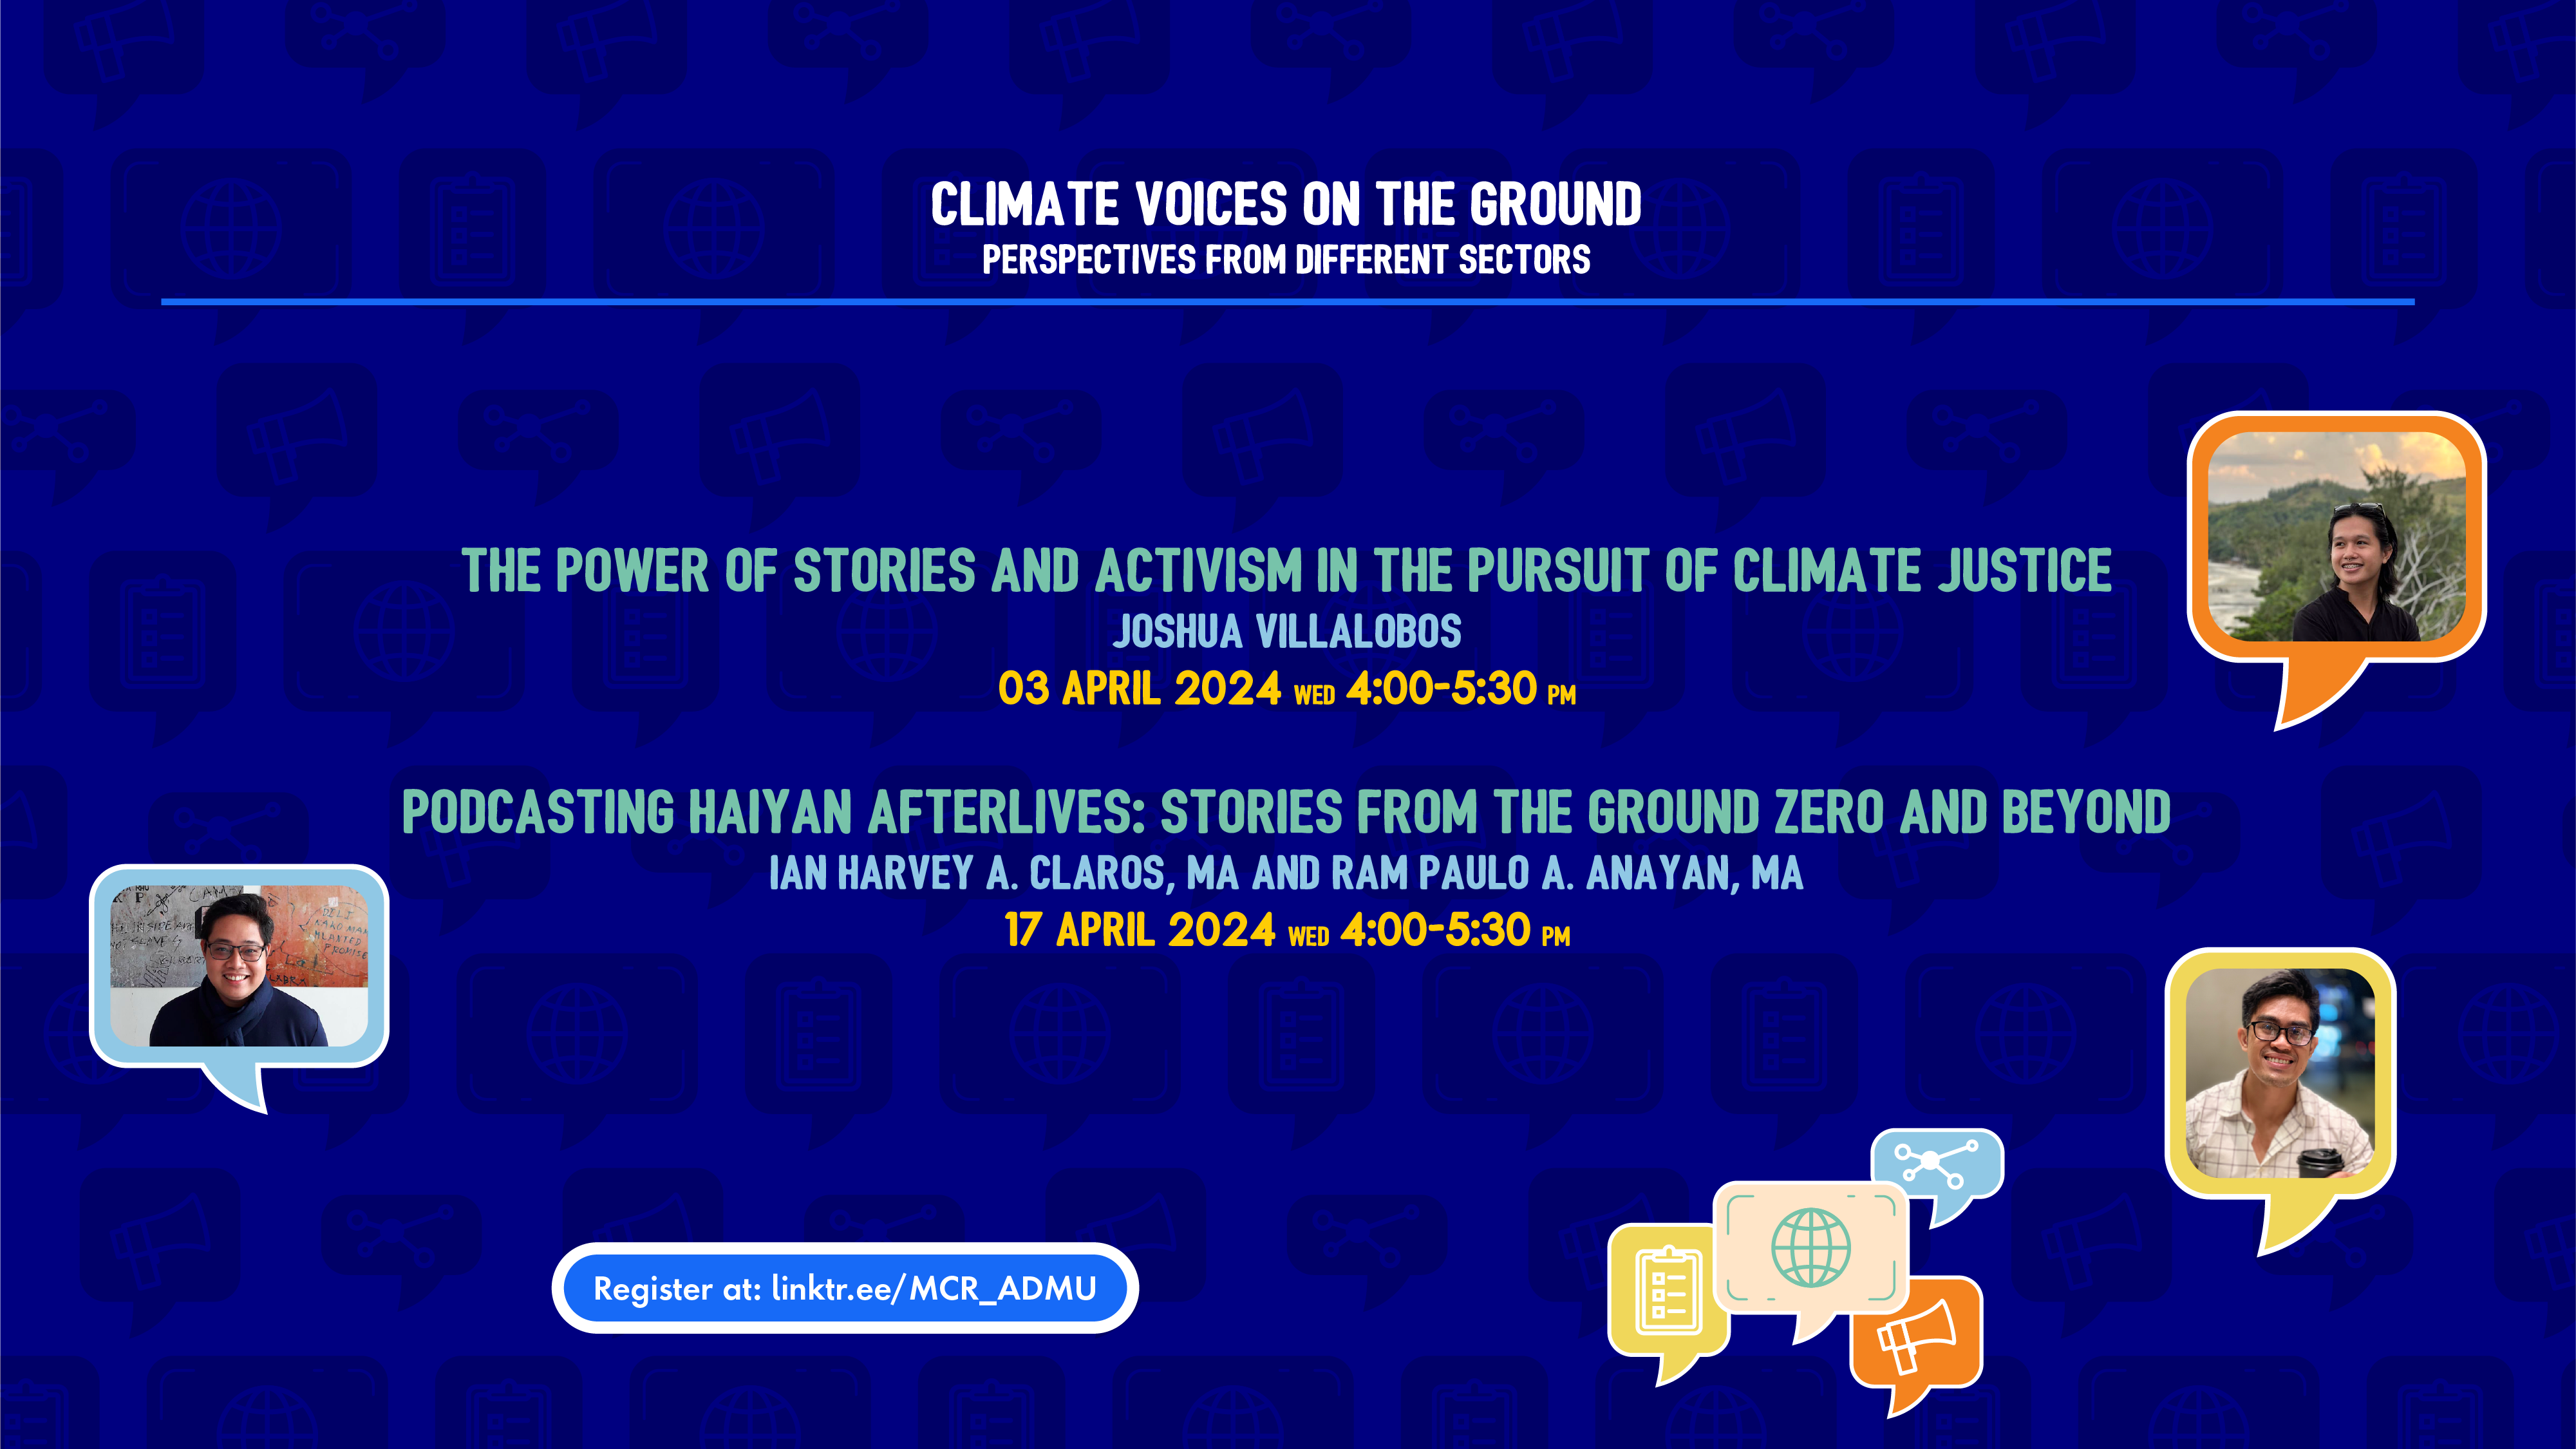 The topics, schedule, and speakers for the two webinars of the "Climate Voices on the Ground: Perspectives from Different Sectors" series. The webinars will occur on the 3rd and 17th of April, from 4:00 to 5:30pm.